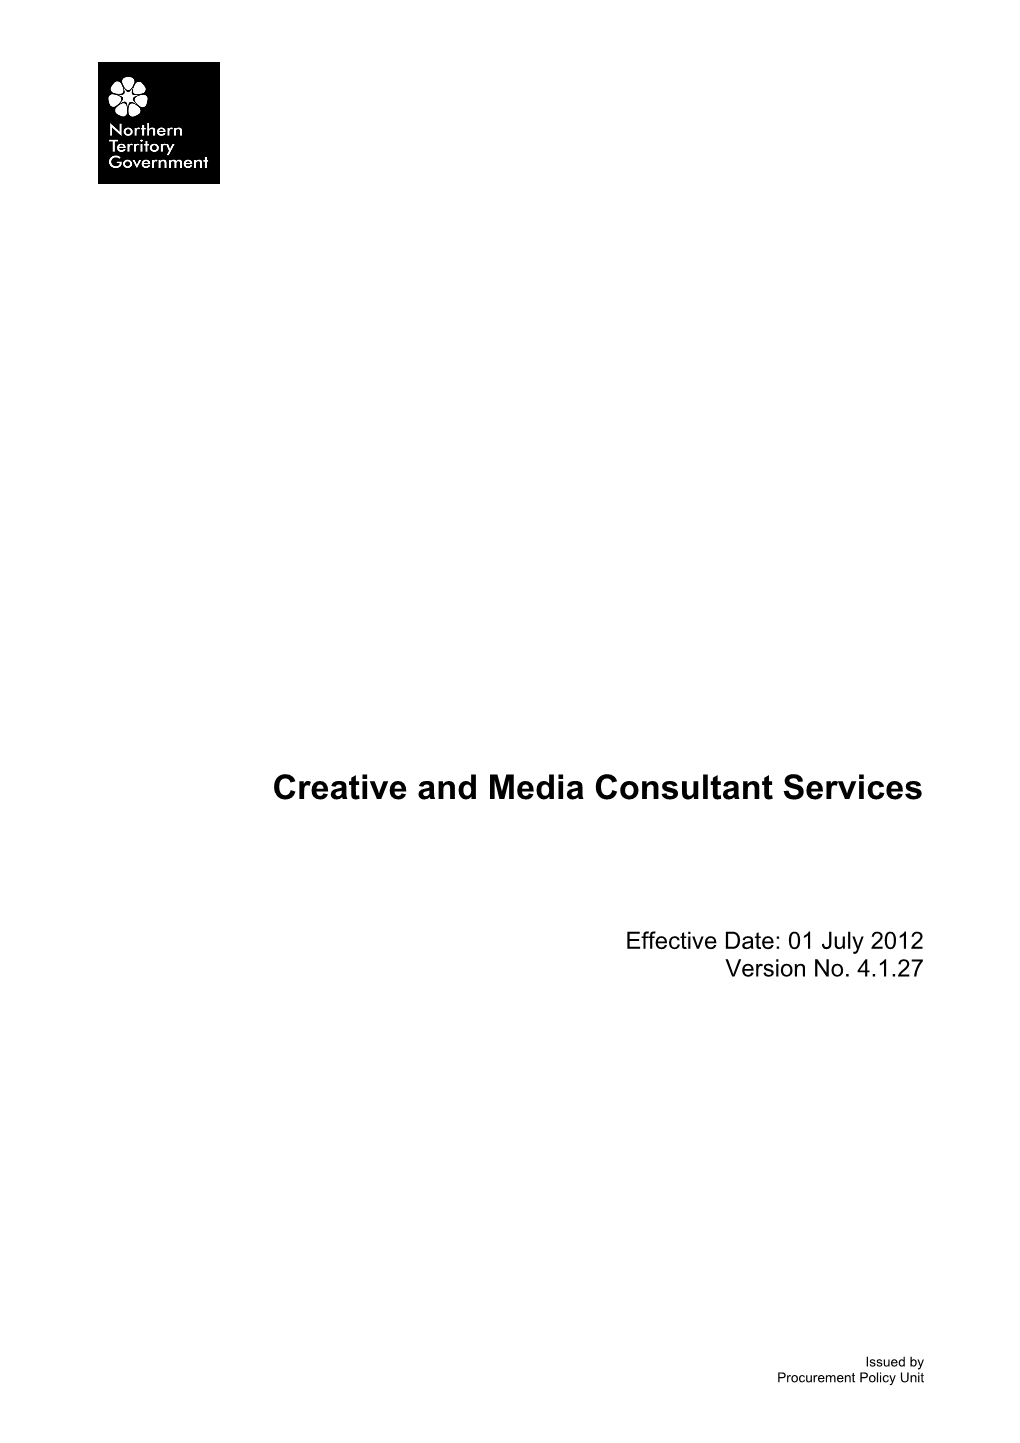 Creative and Media Consultant Services - V 4.1.27 (01 July 2012)